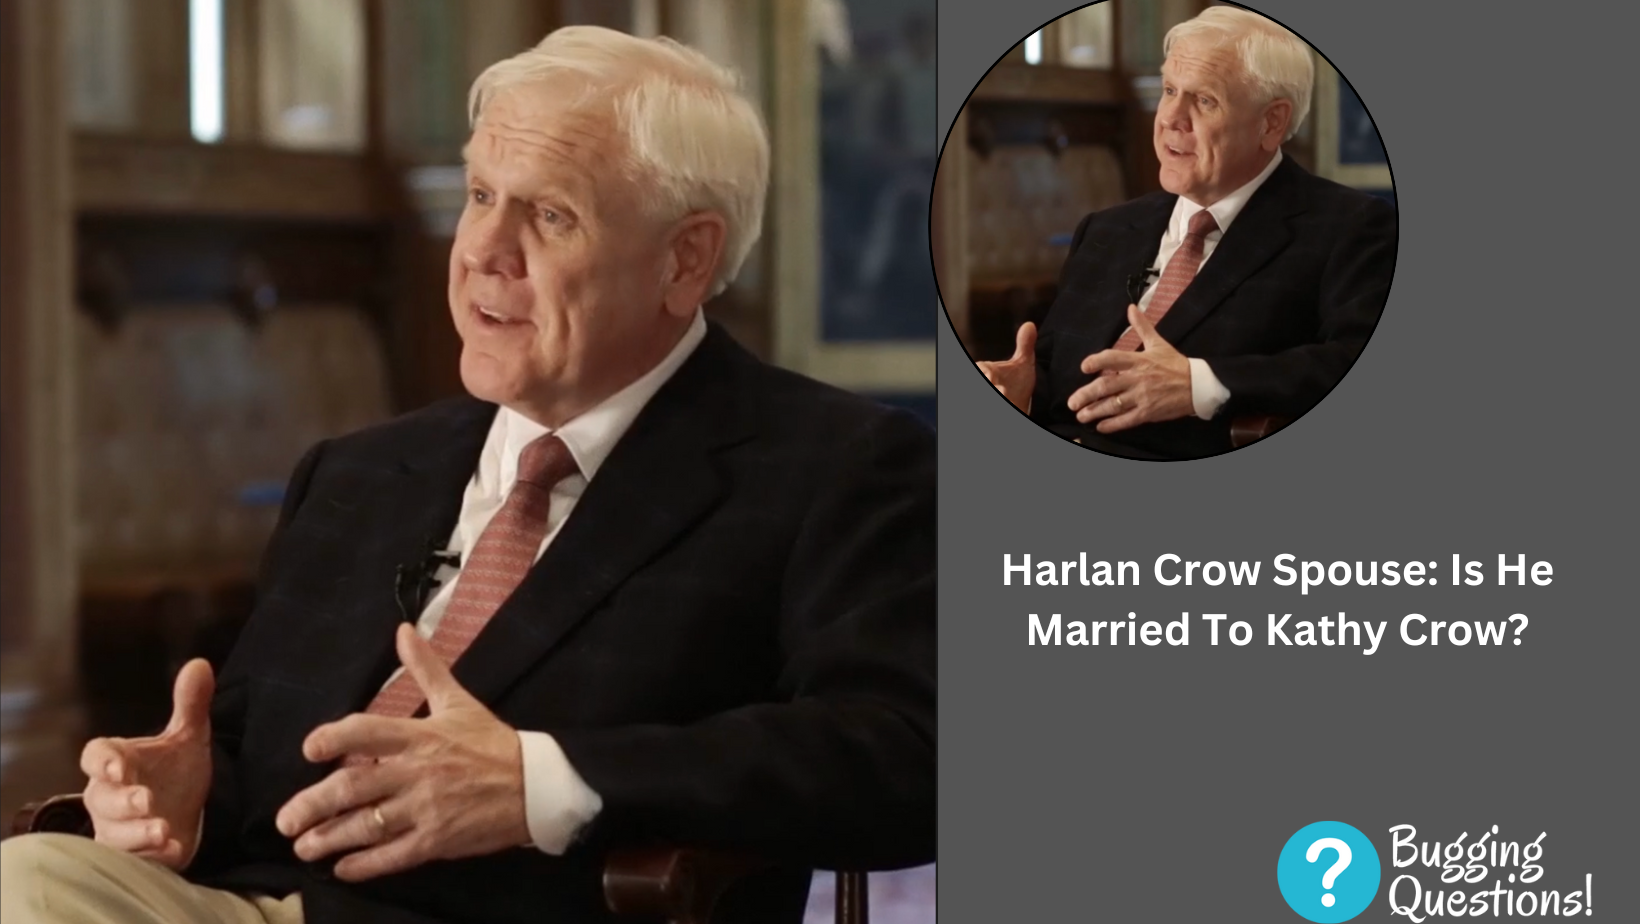 Harlan Crow Spouse: Is He Married To Kathy Crow?